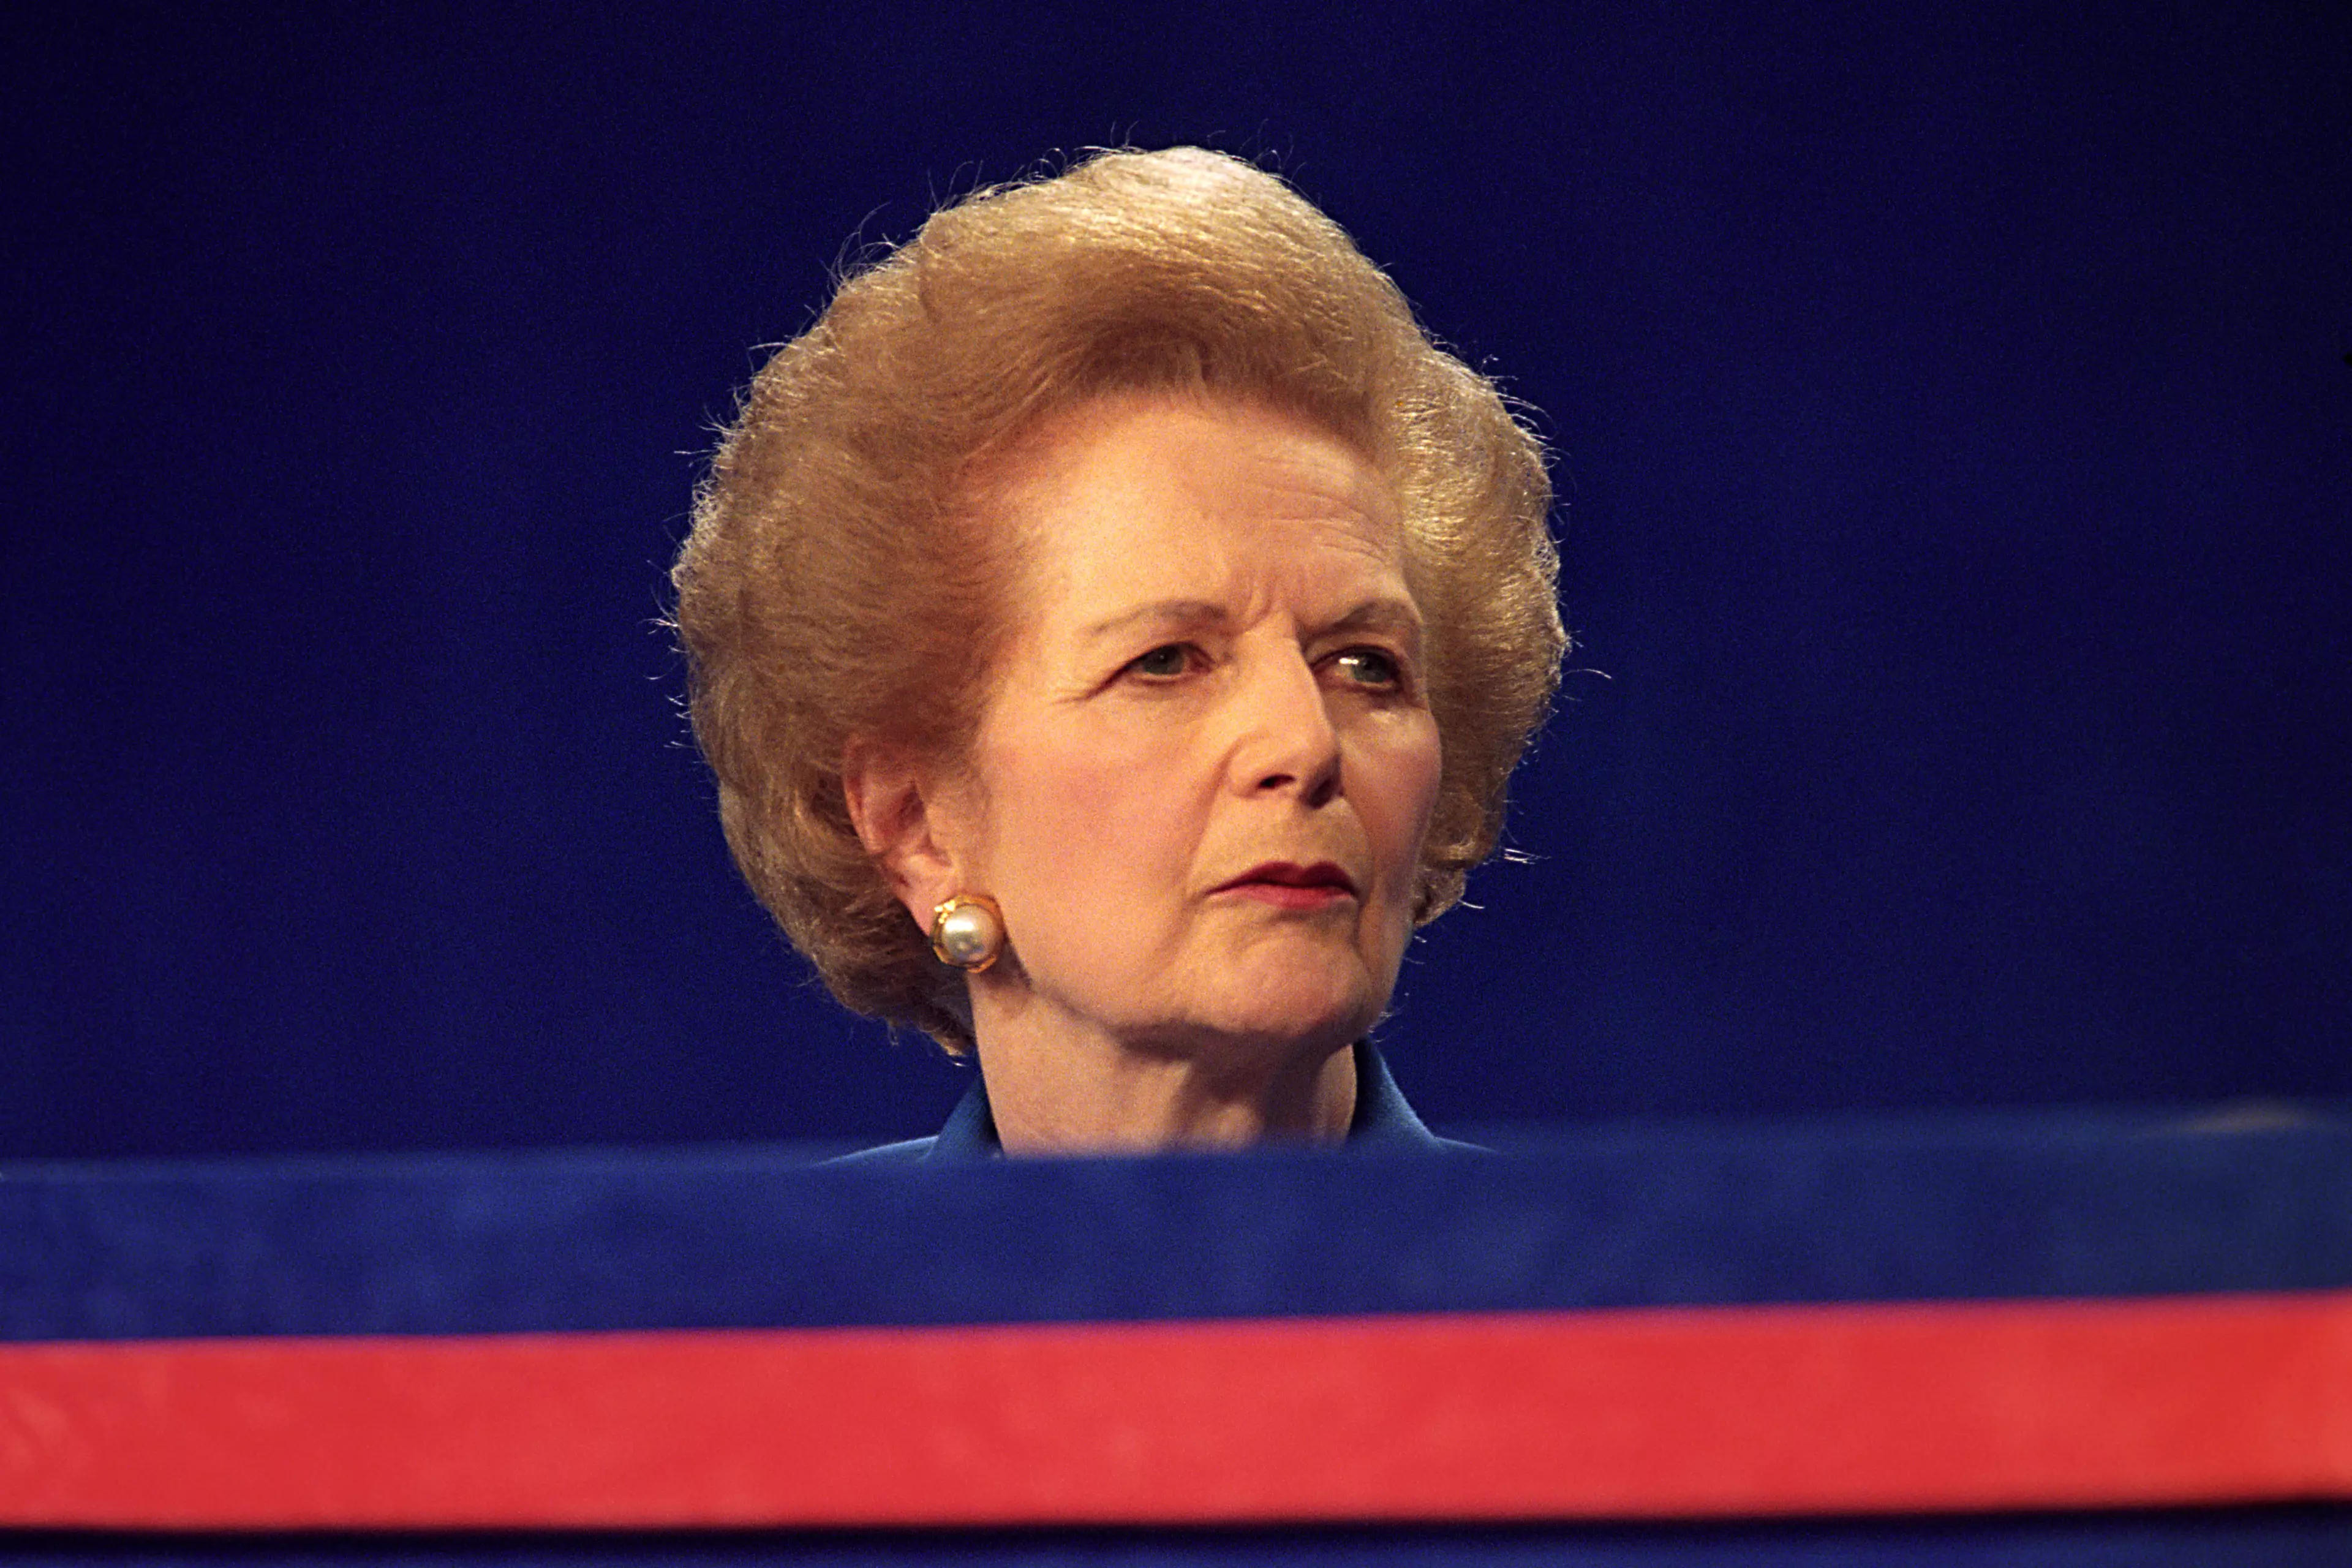 Margaret Thatcher was an incredibly divisive political figure (